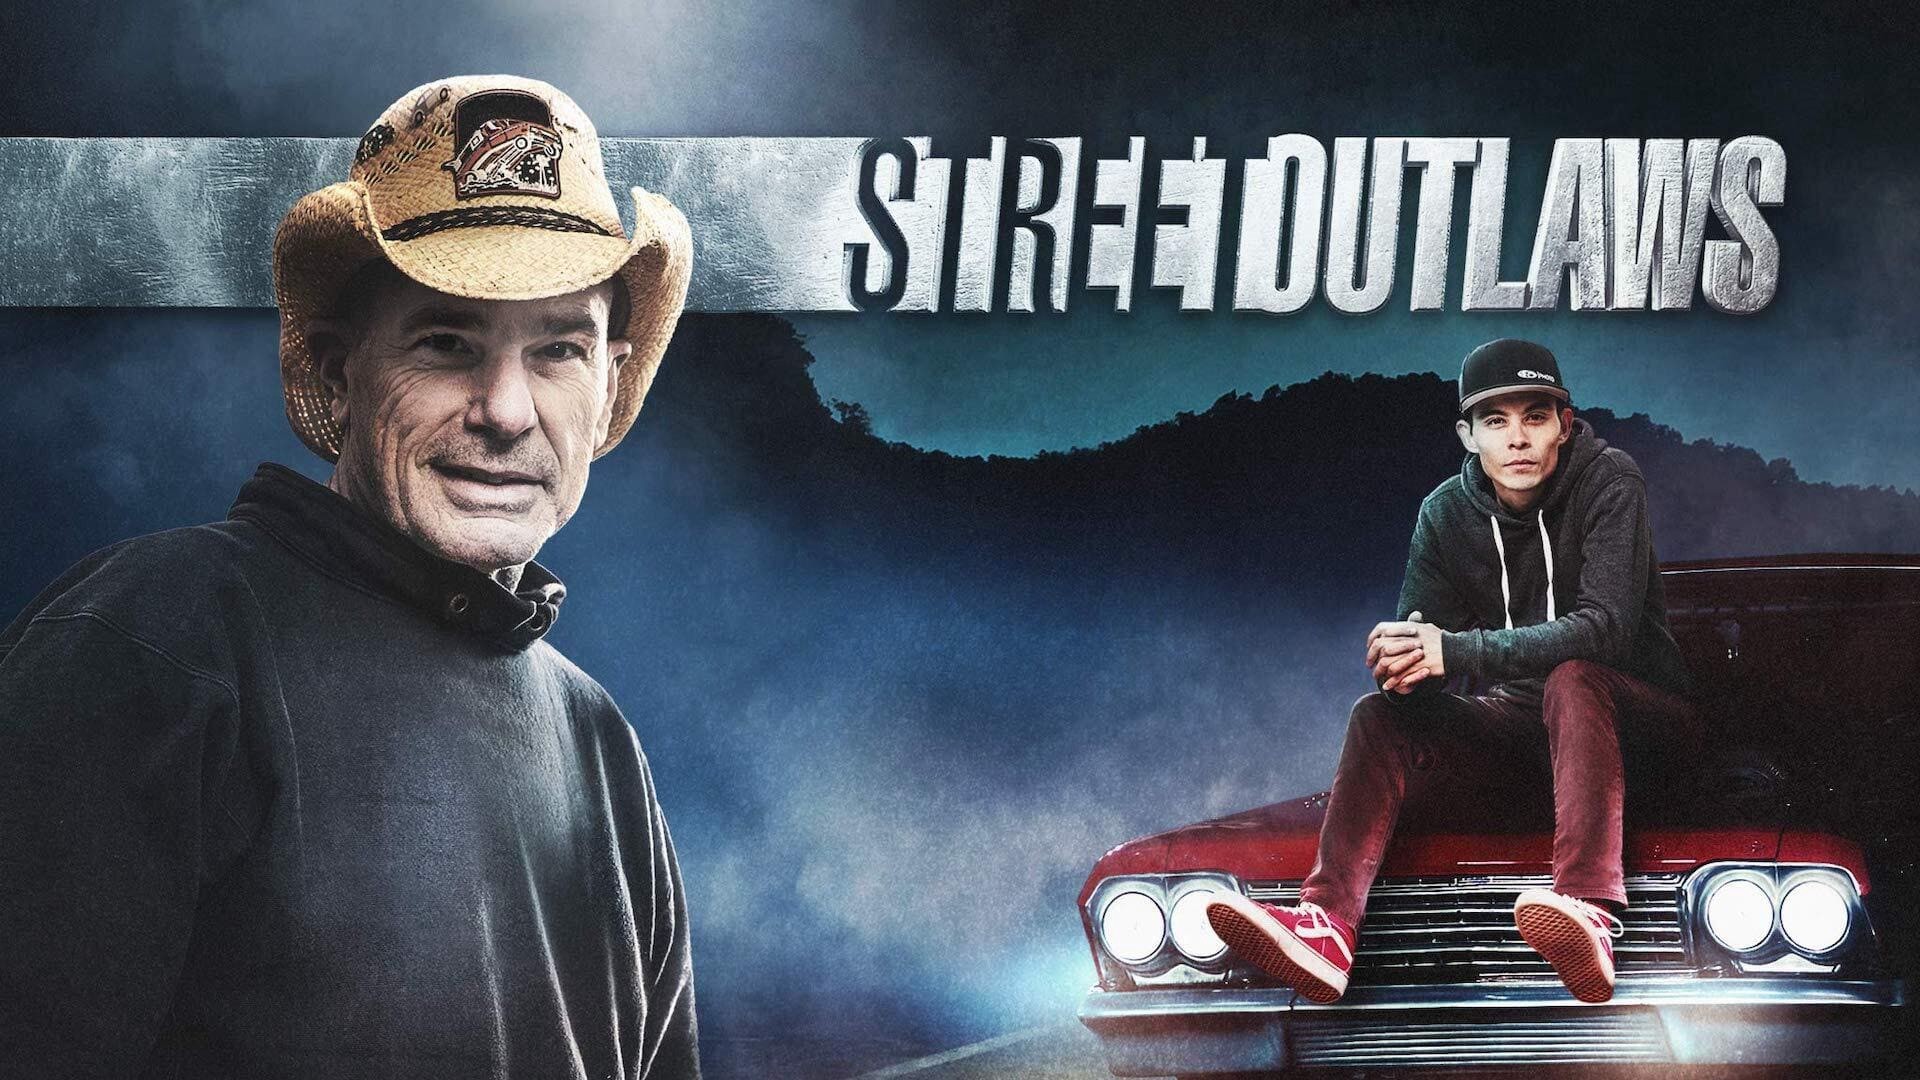 ‘Street Outlaws’ is an American reality television series that documents il...